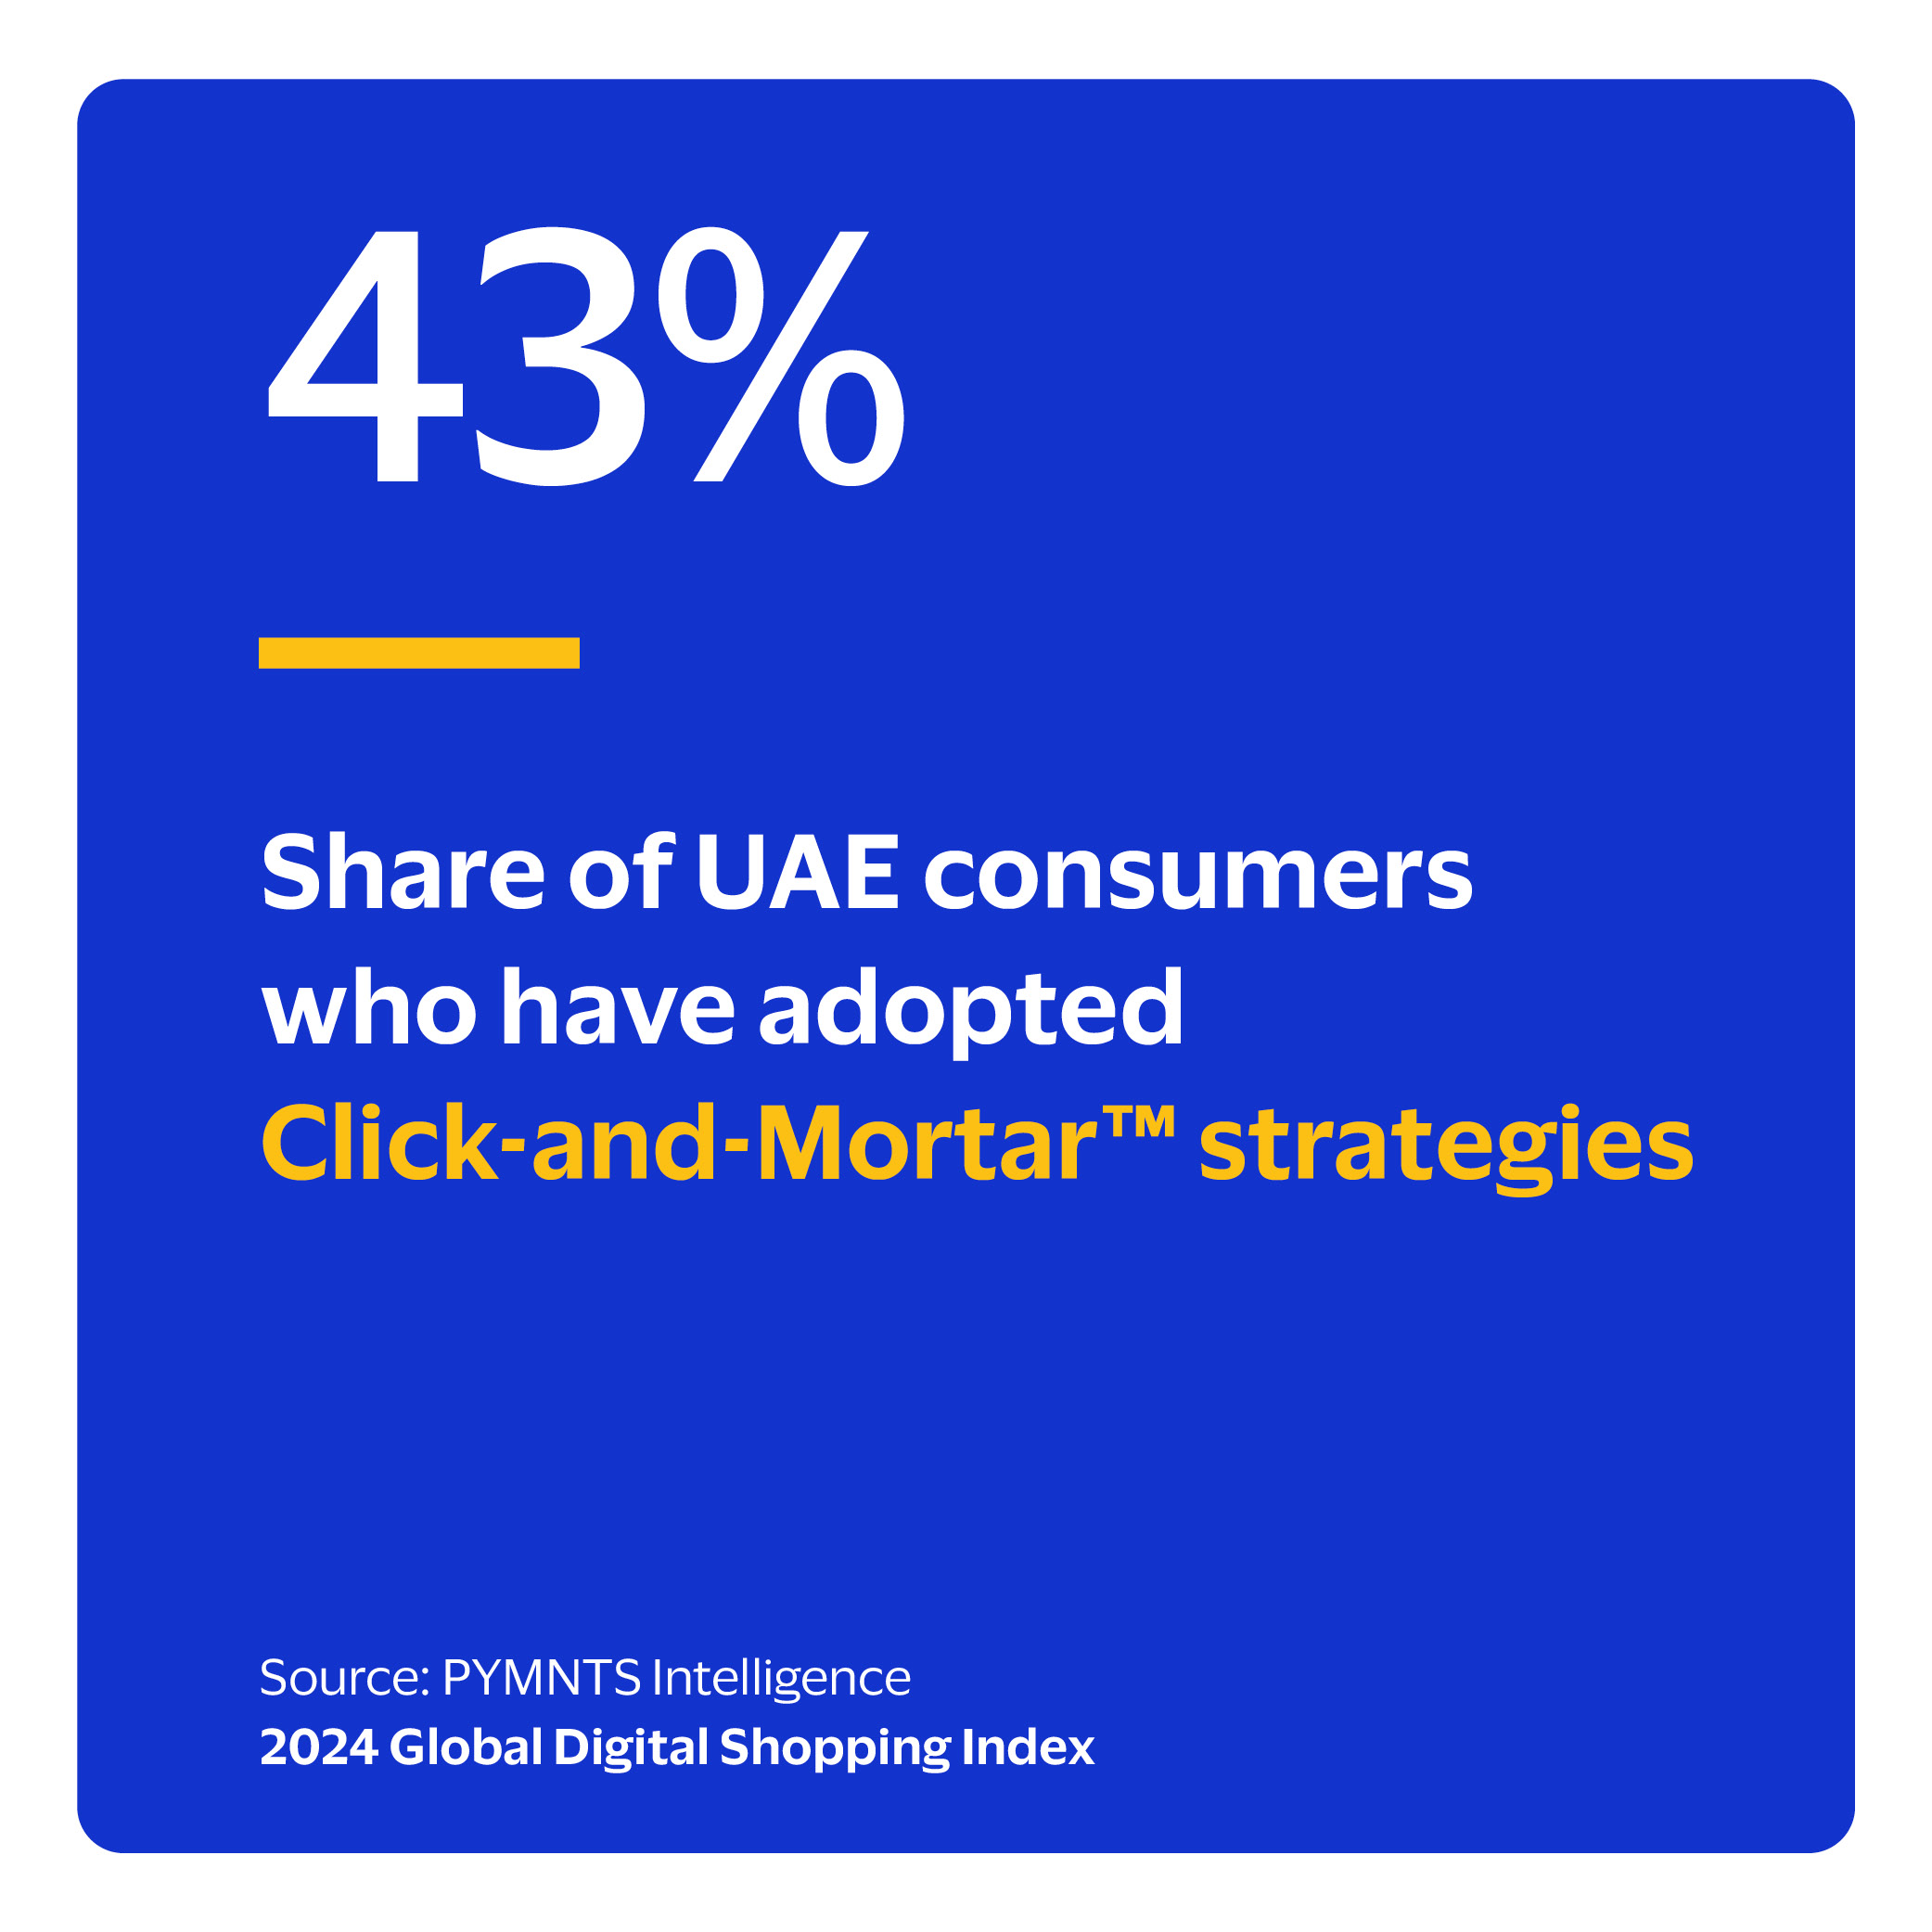 43%: Share of UAE consumers who have adopted Click-and-Mortar™ strategies